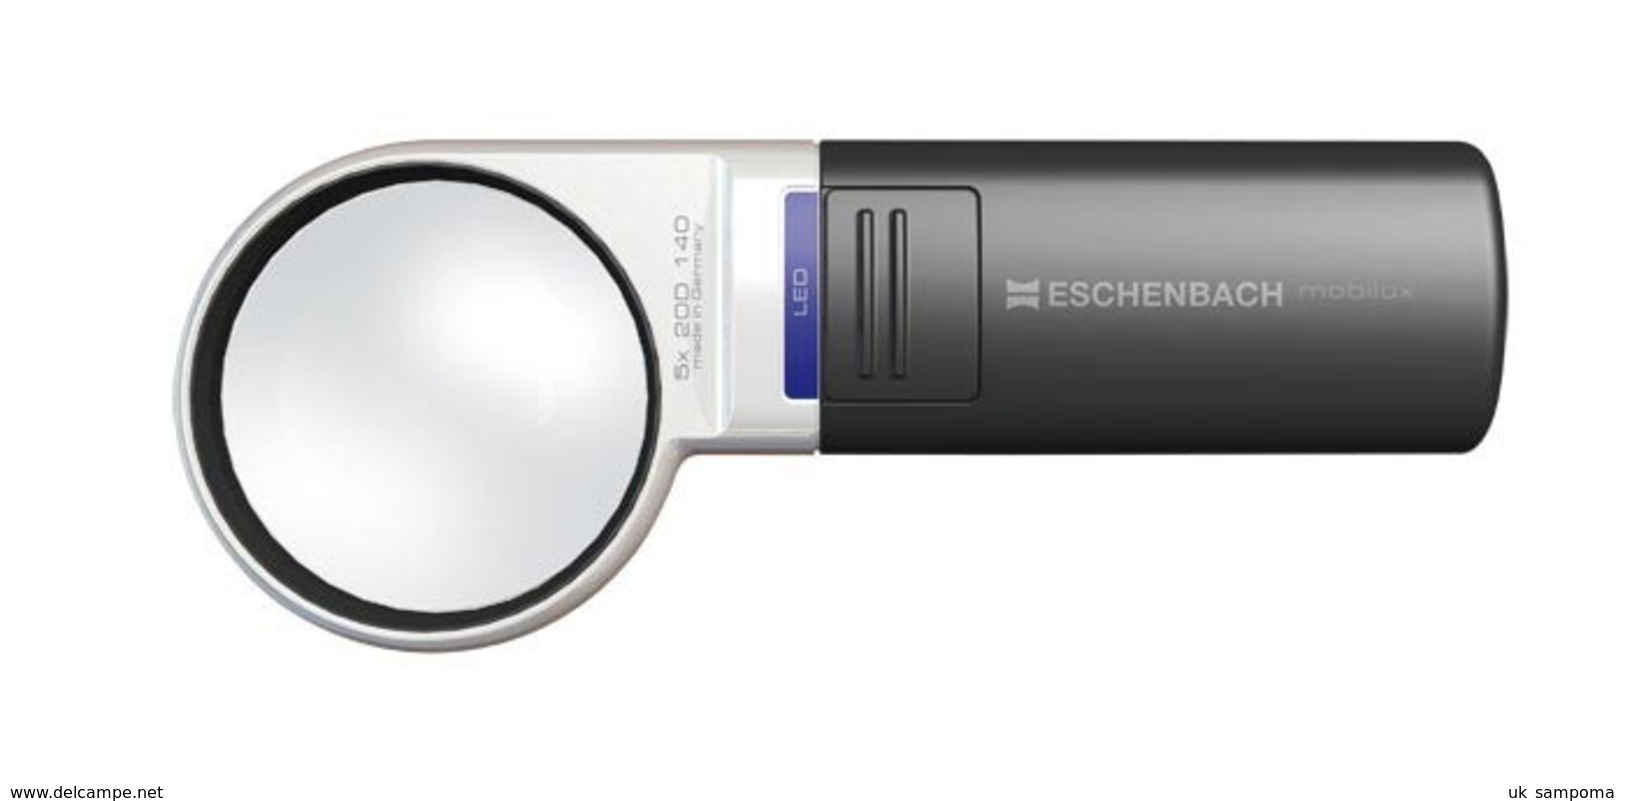 Lindner 7121 Eschenbach Illuminated Pocket Magnifier With LED - 5x - Stamp Tongs, Magnifiers And Microscopes